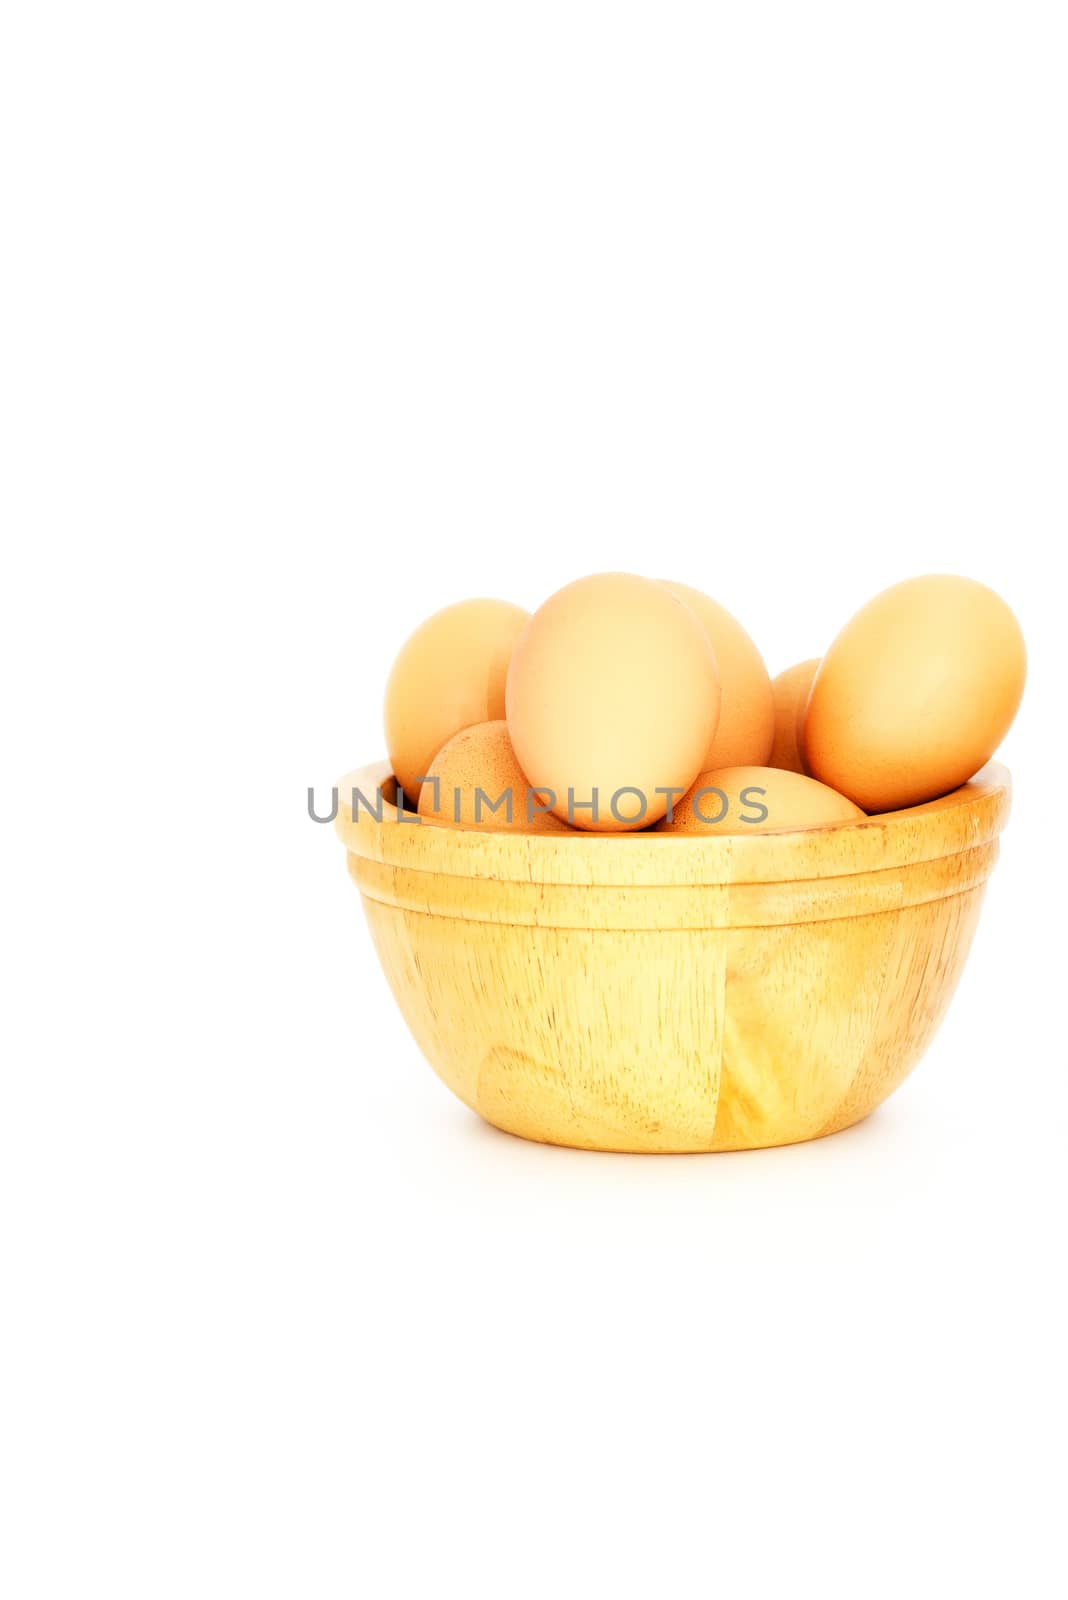 Egg, Chicken Eggs in  a bowl isolate on white by Yuri2012